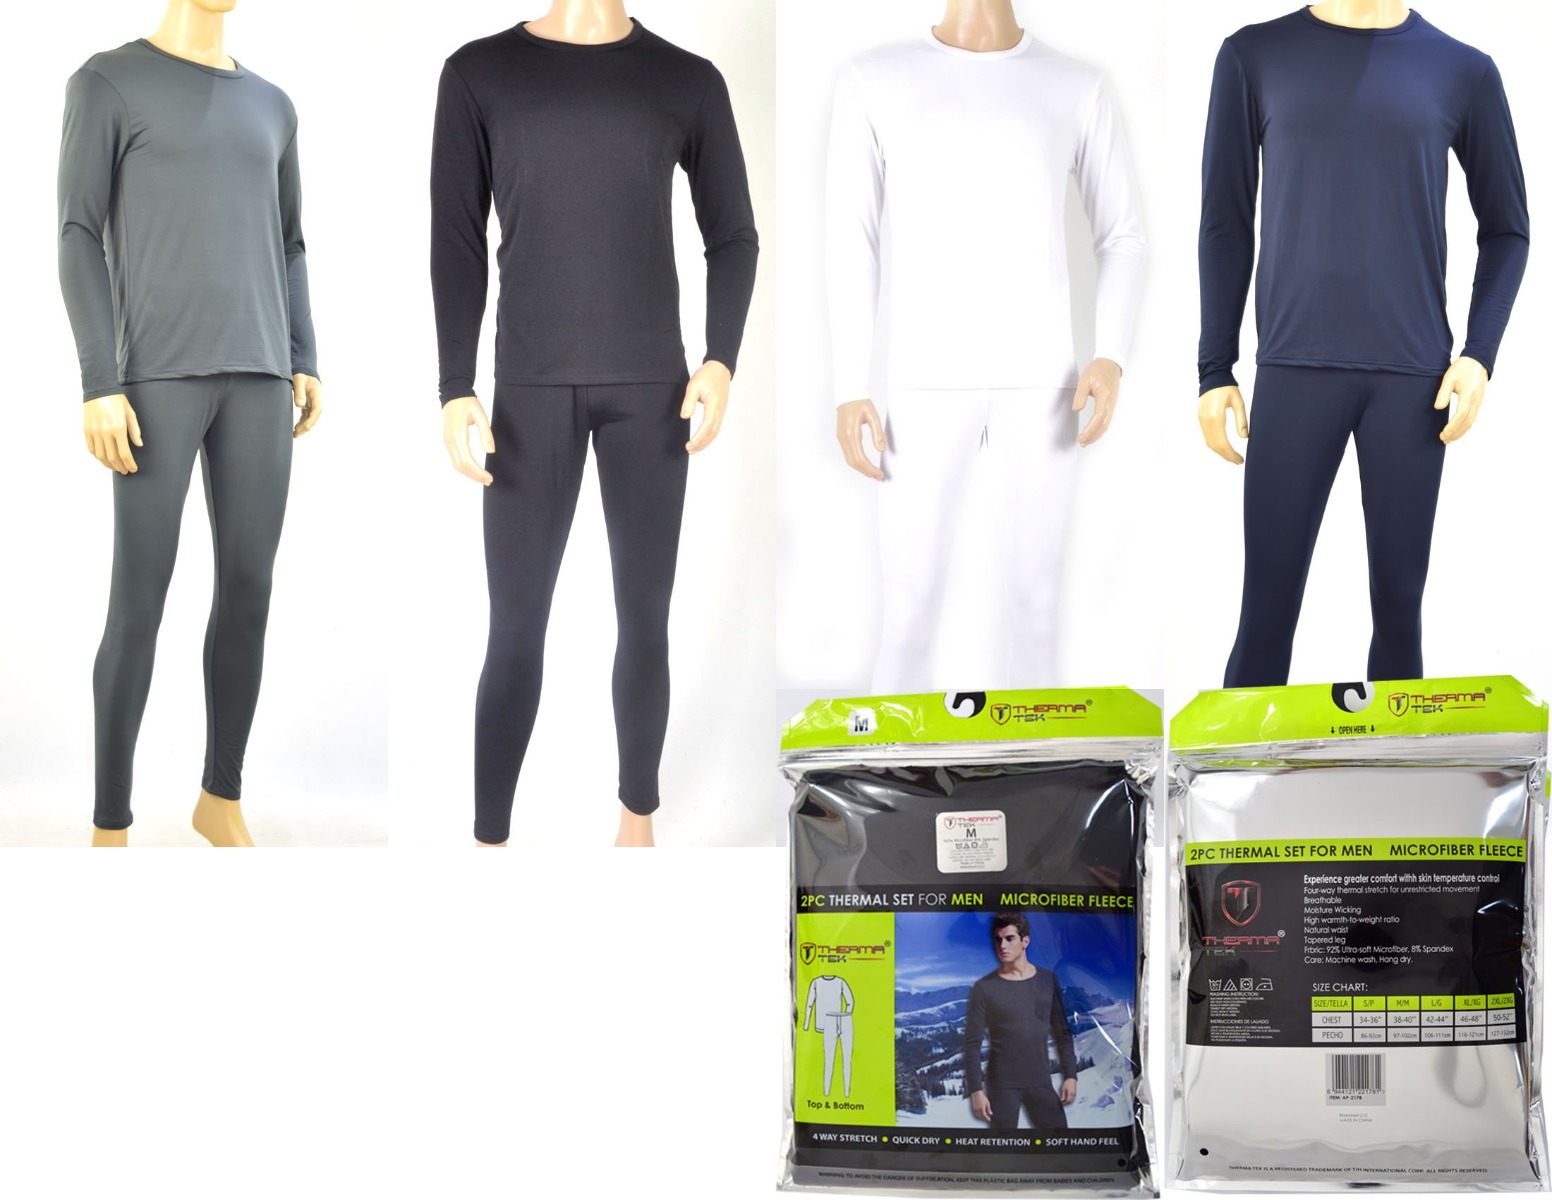 Men's Fleece Lined Thermal UNDERWEAR Sets - Assorted Solid Colors - Choose Your Size(s)